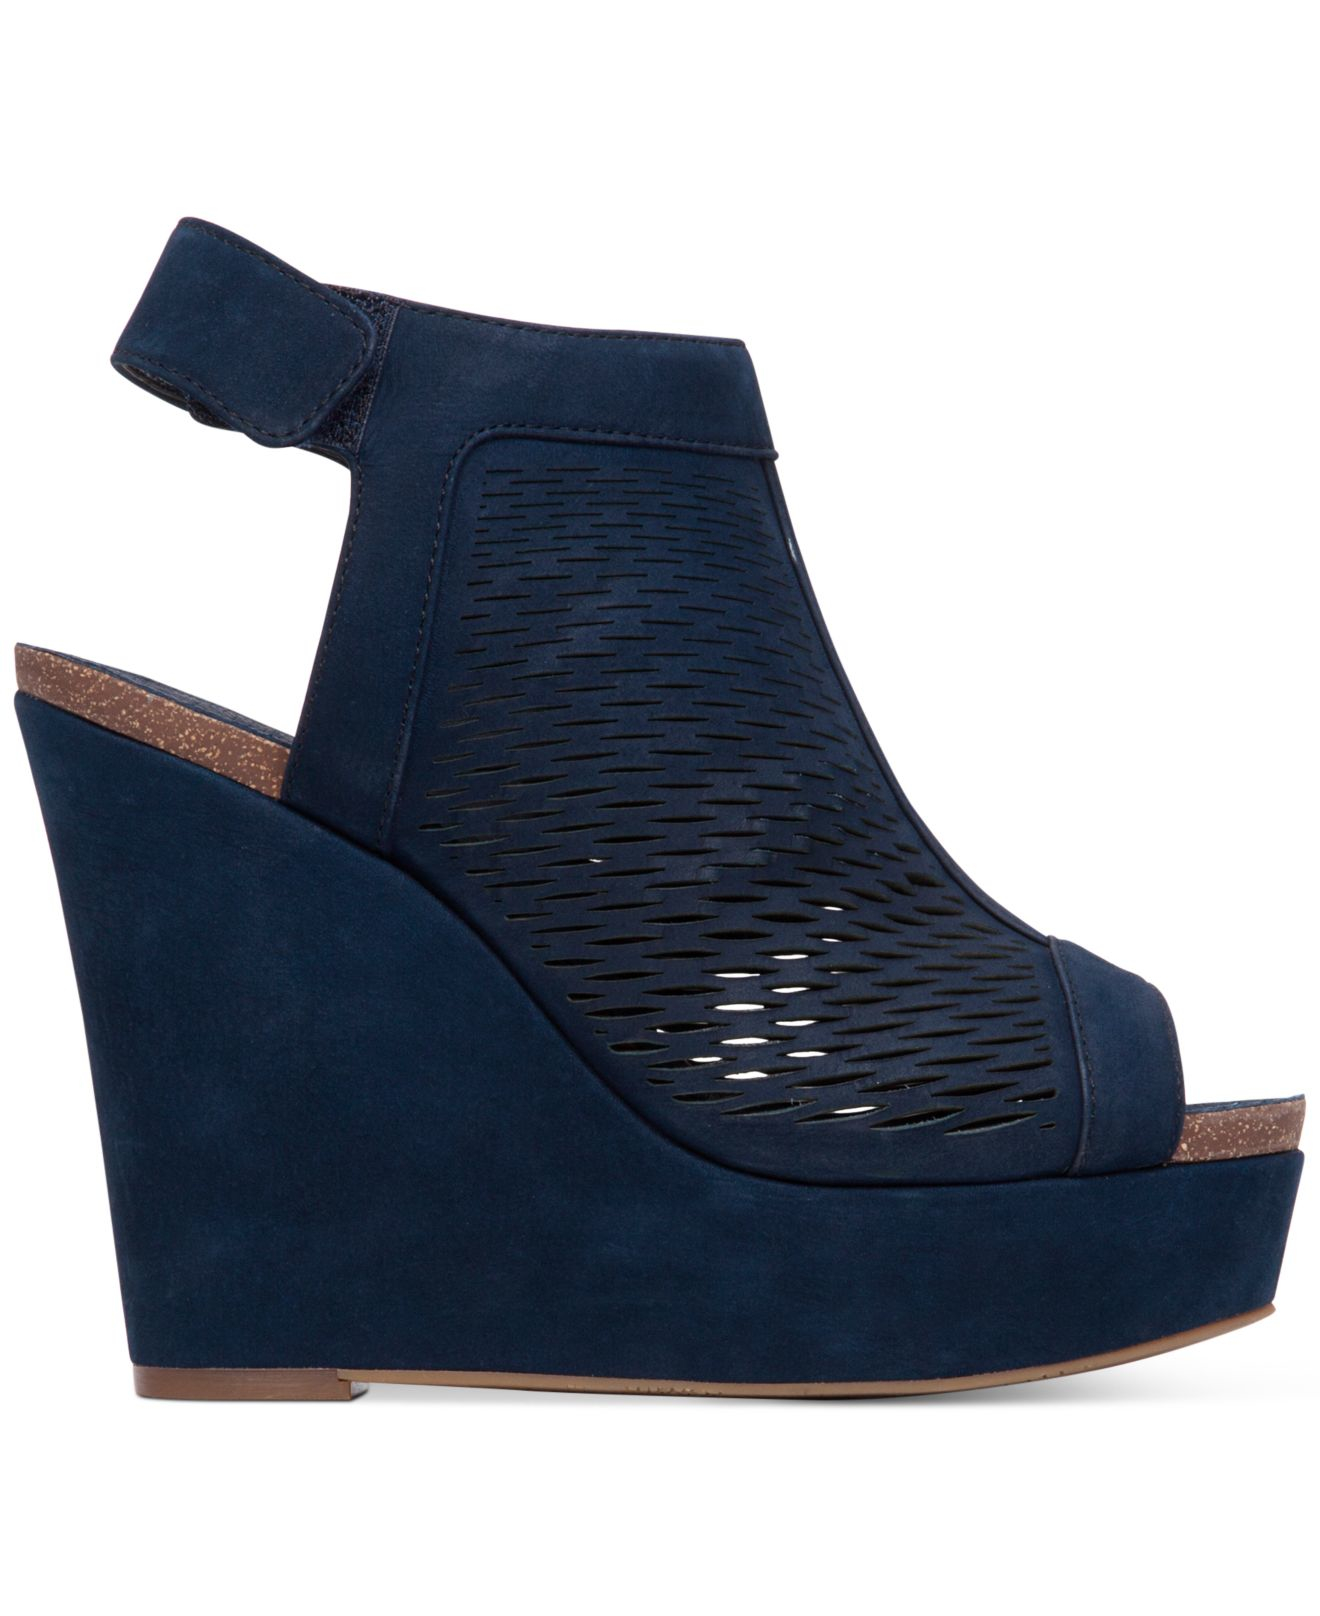 Vince Camuto Kyrene Wedge Sandals in Blue | Lyst